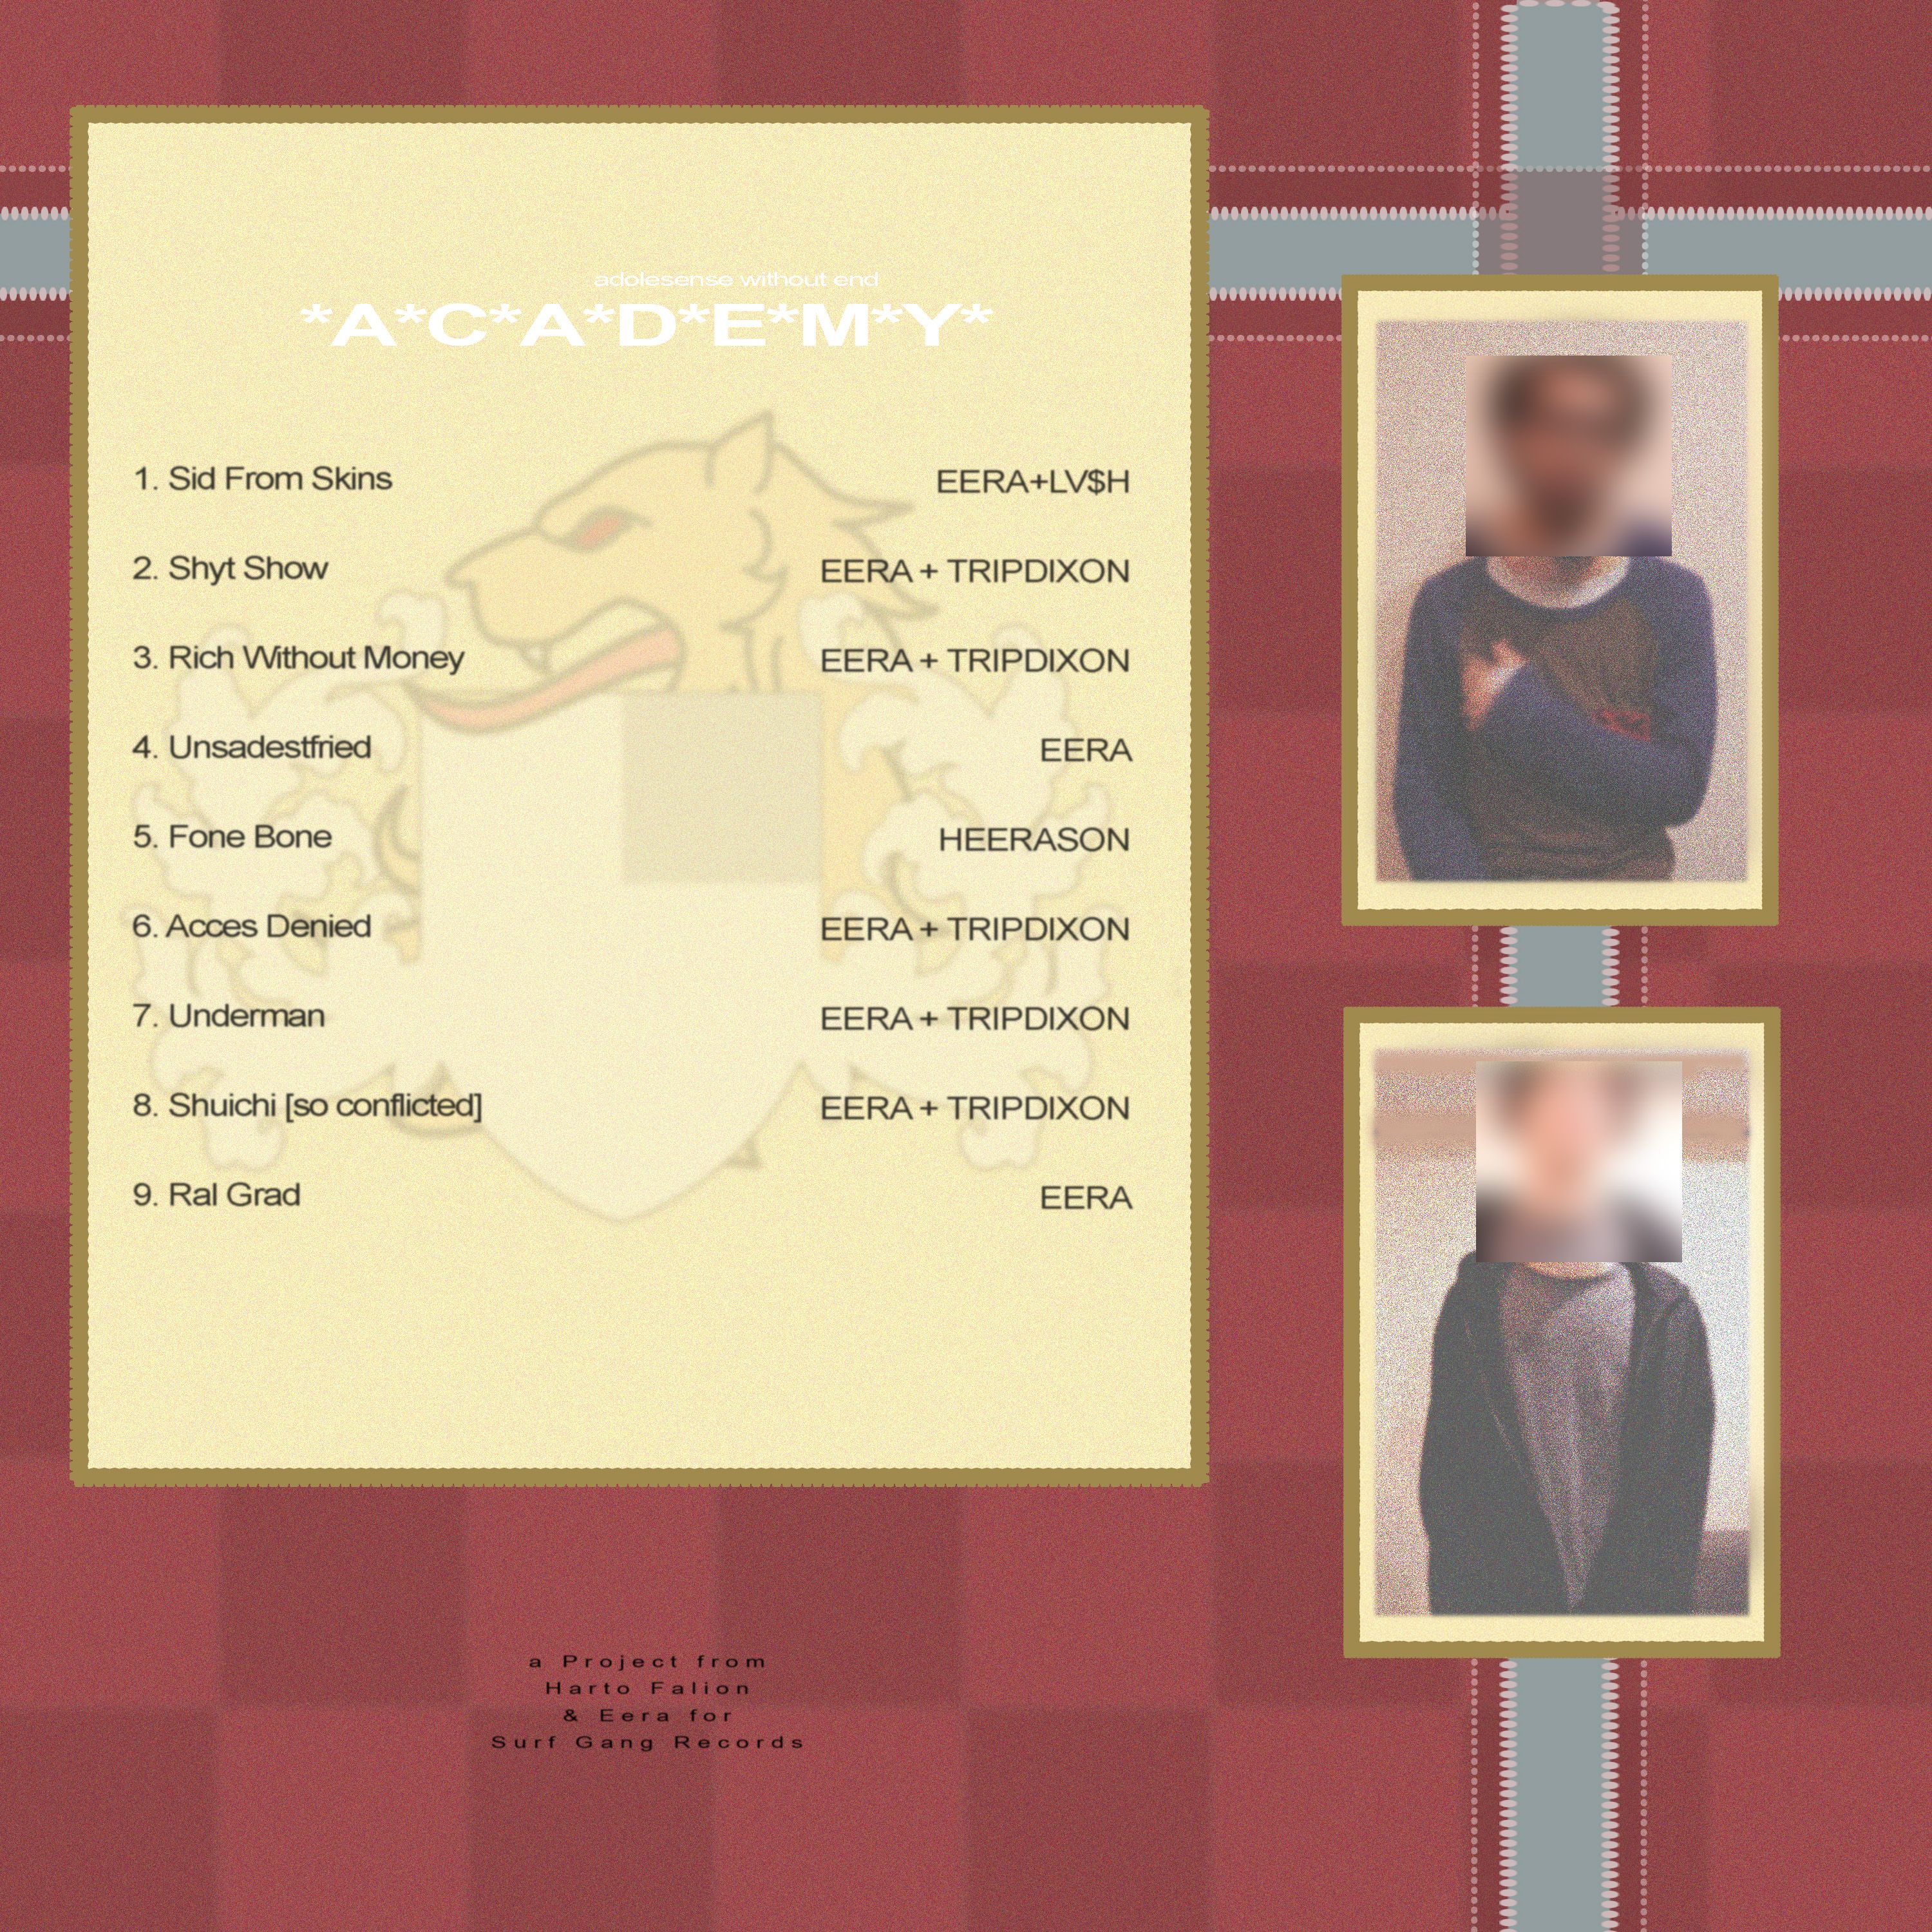 Academy by undefined back cover